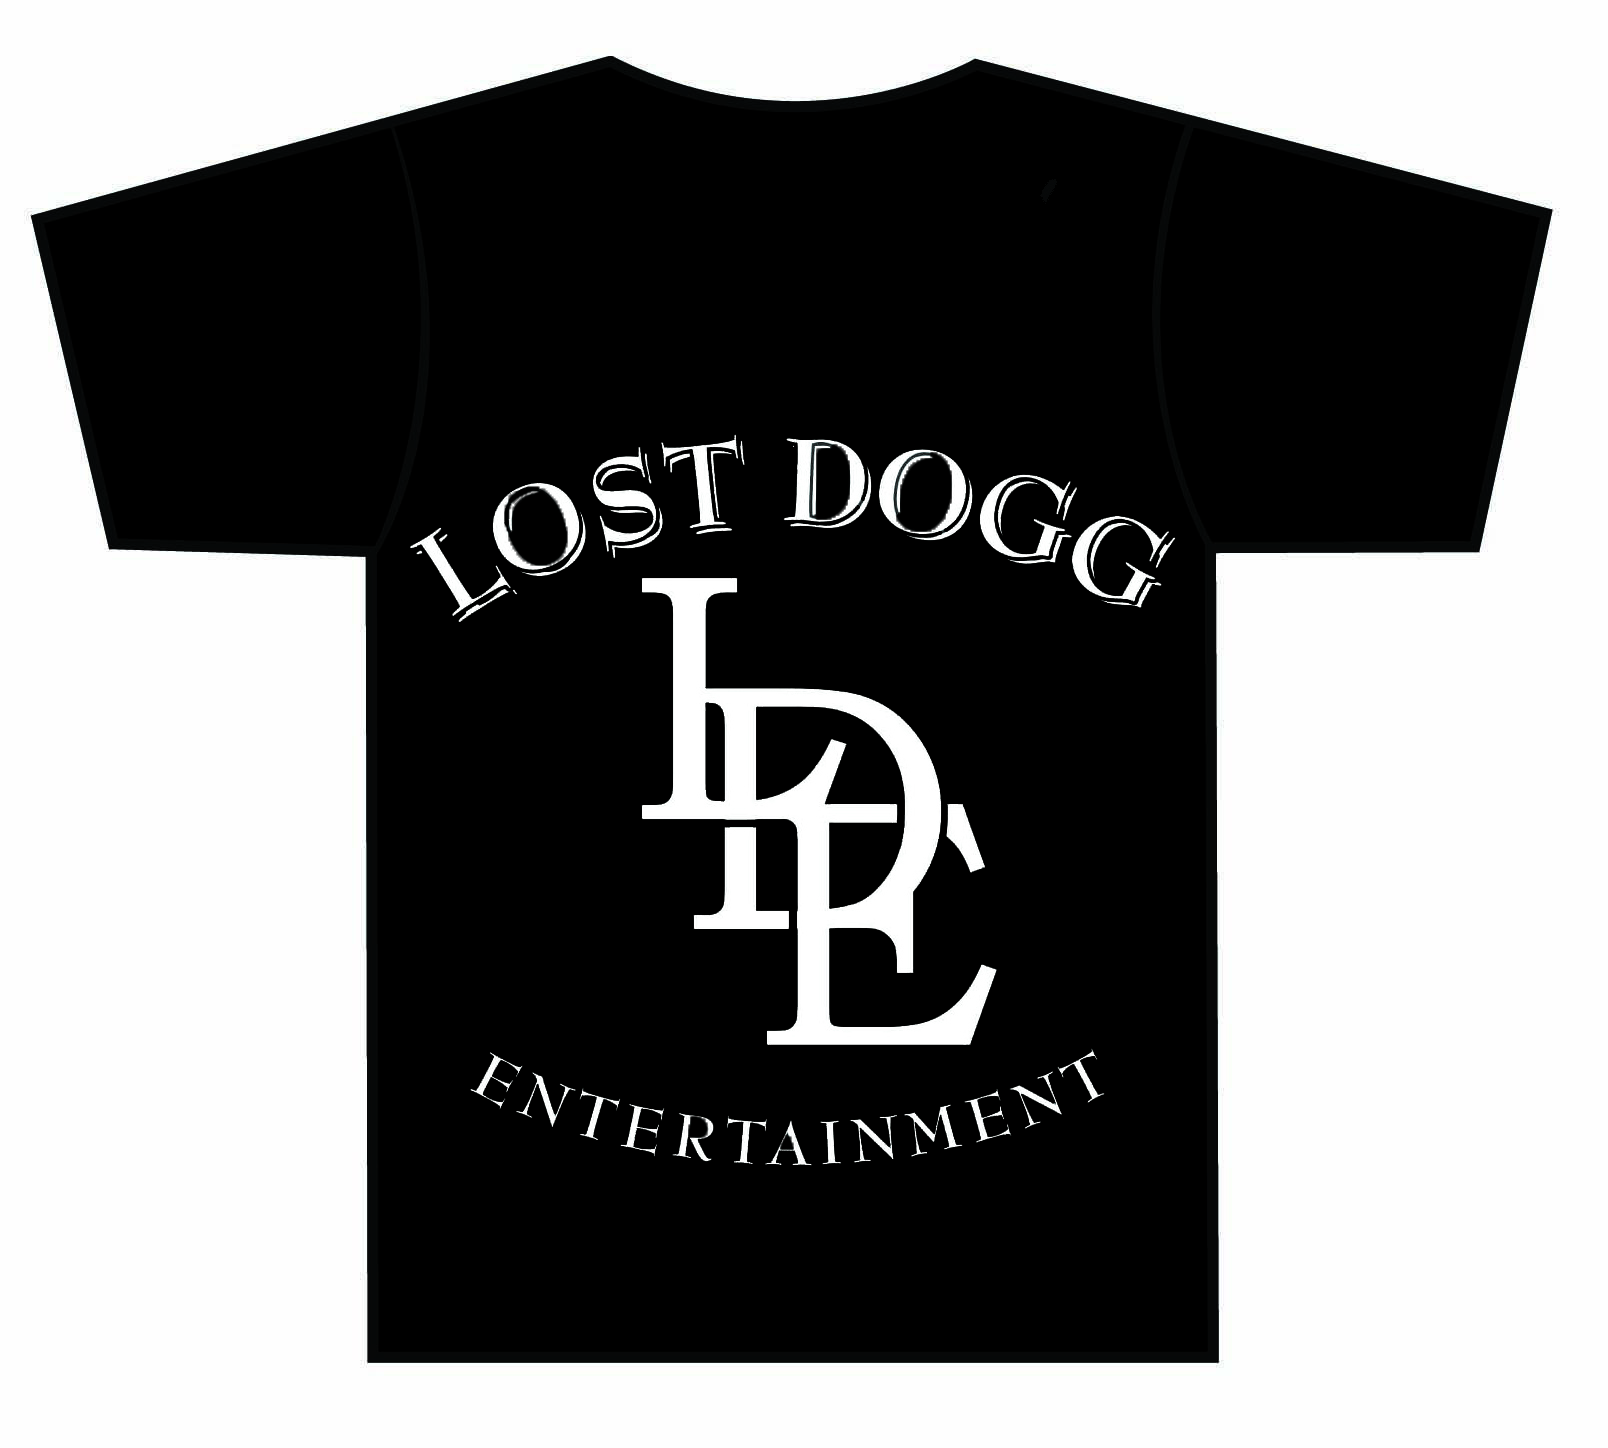 Lost Dogg Entertainment Tee